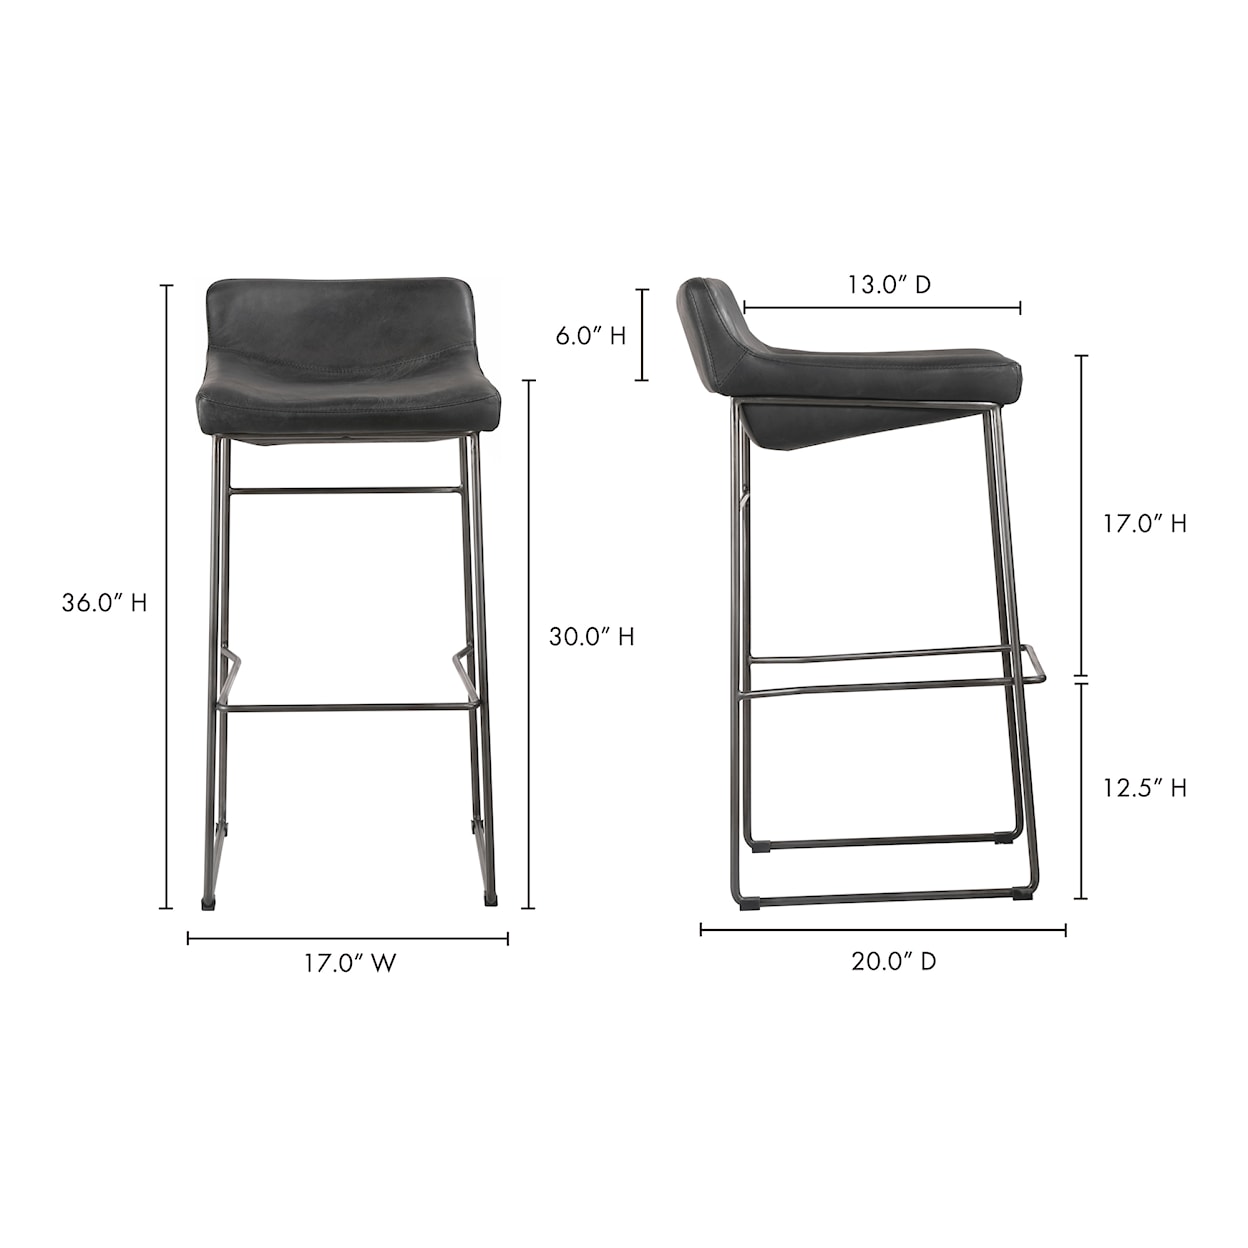 Moe's Home Collection Starlet Starlet Barstool Onyx Black Leather -M2